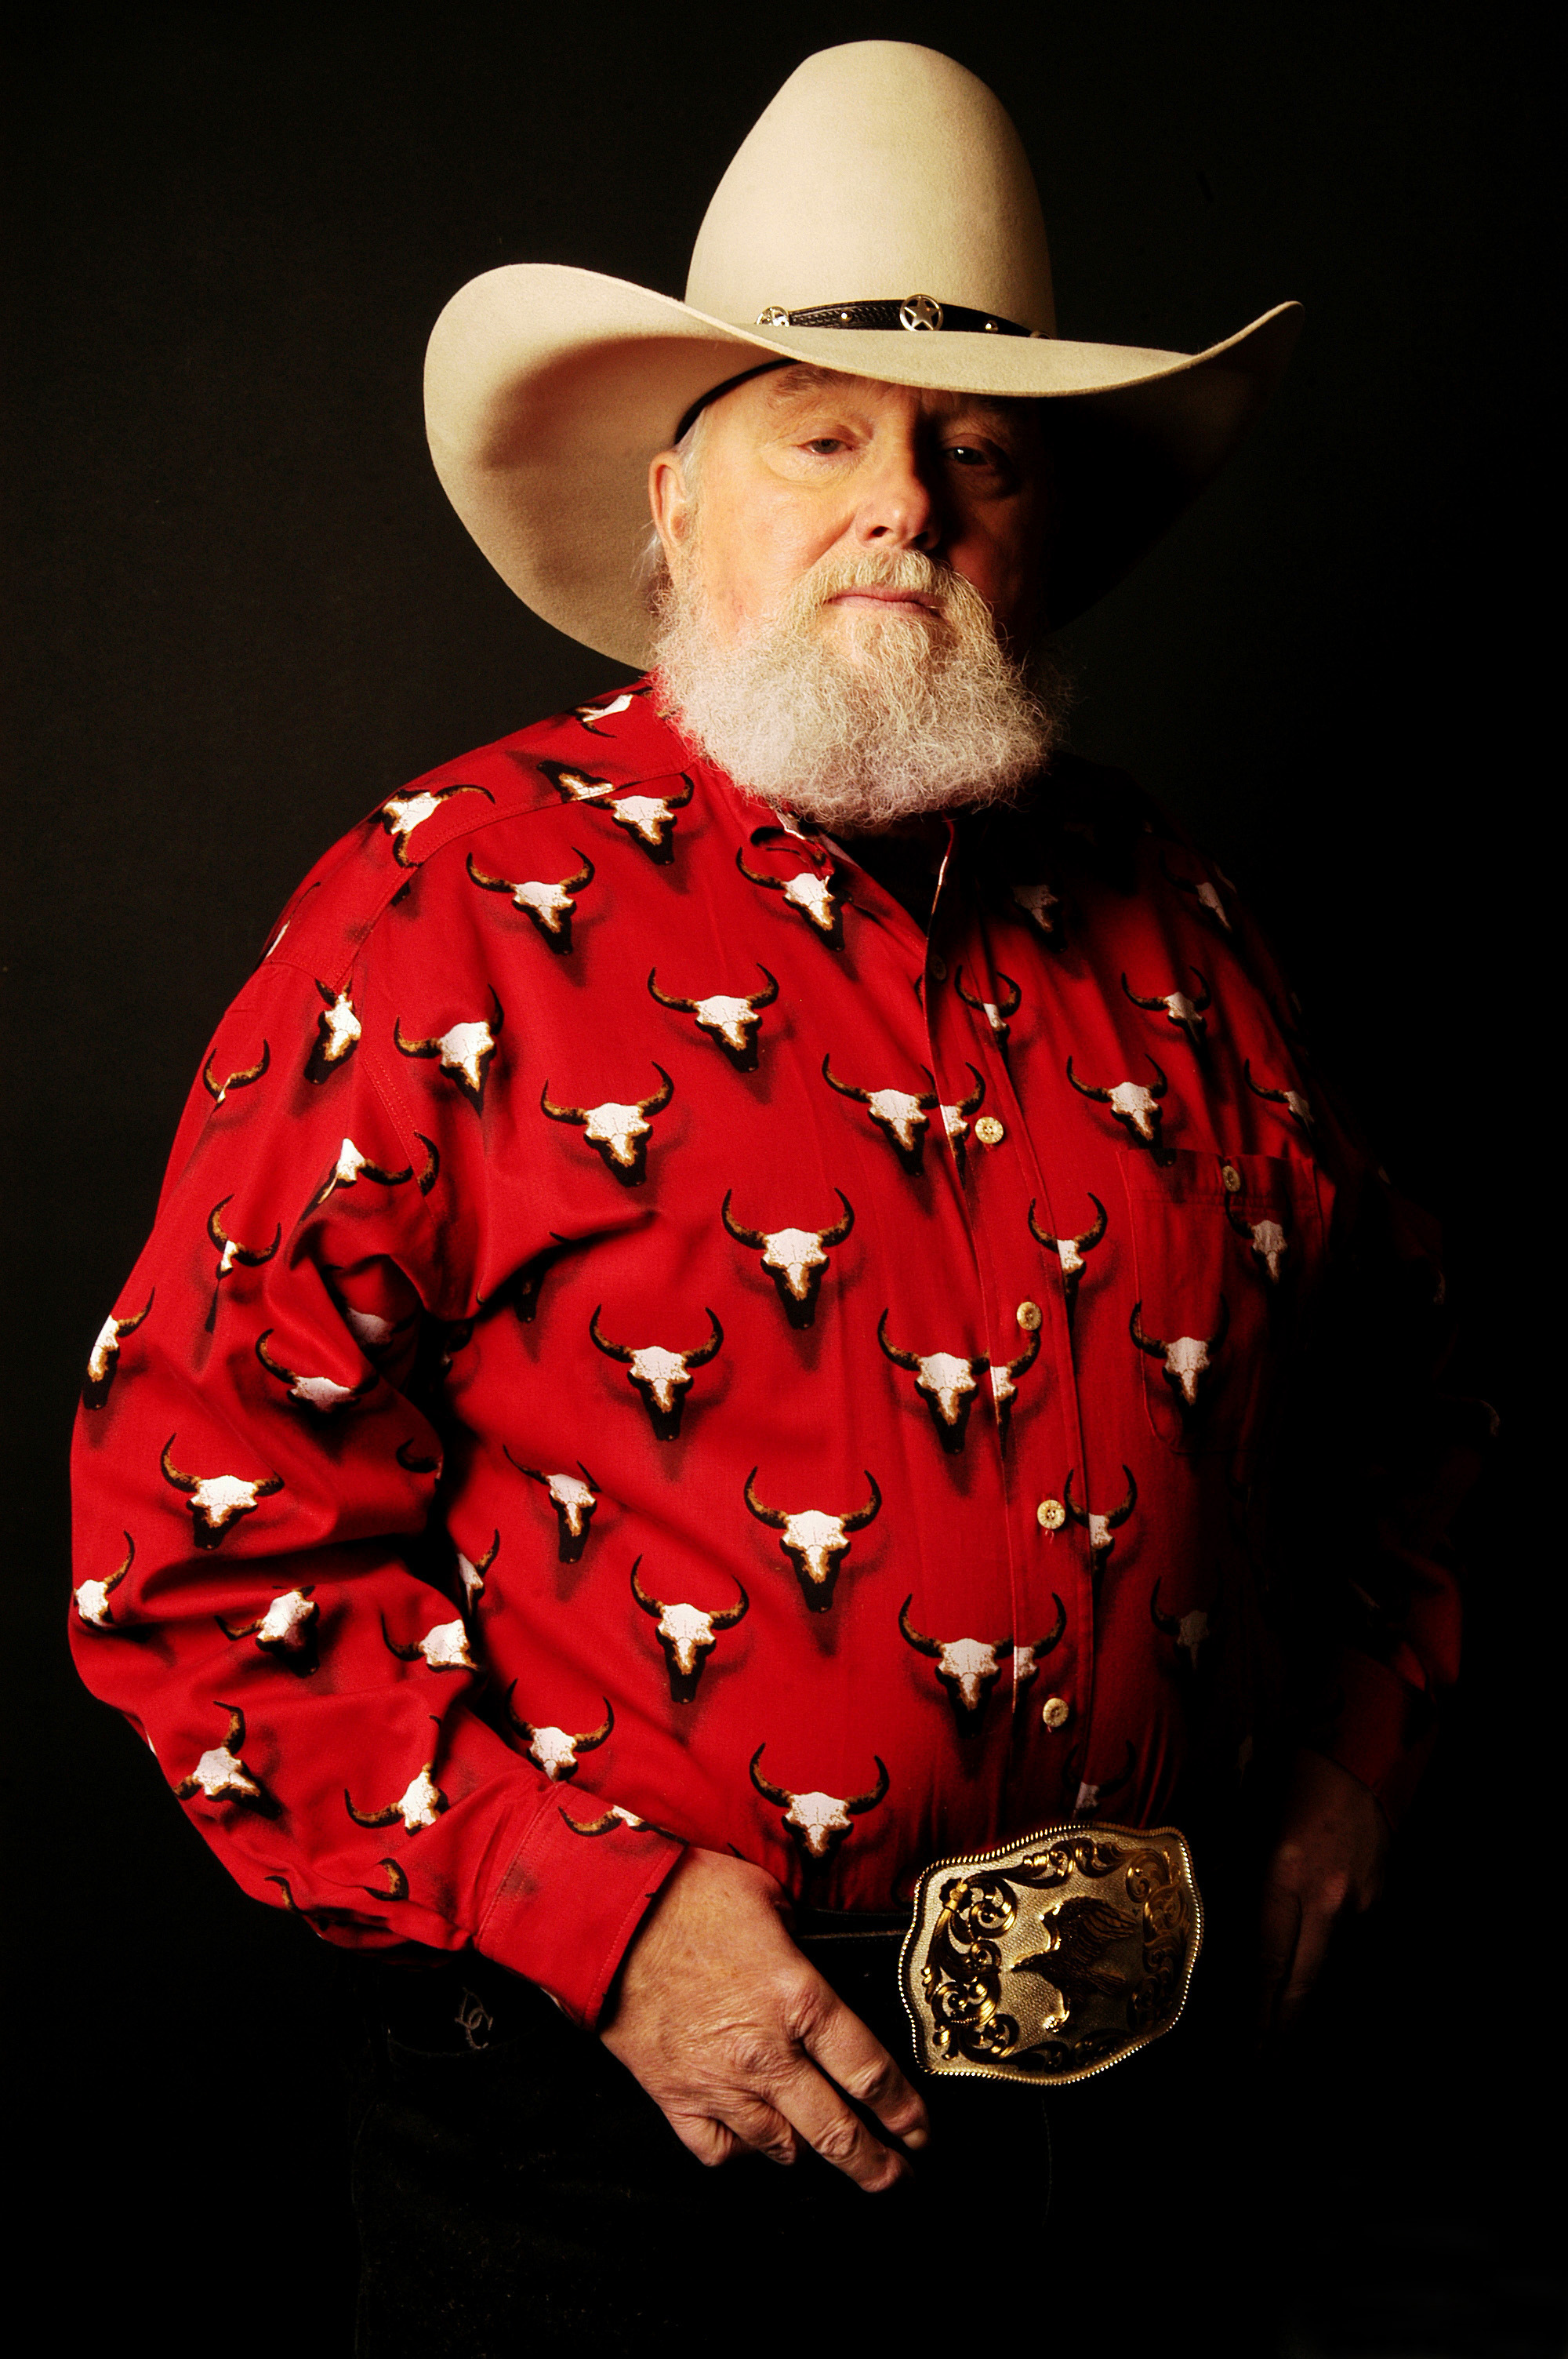 Charlie Daniels's quote #5